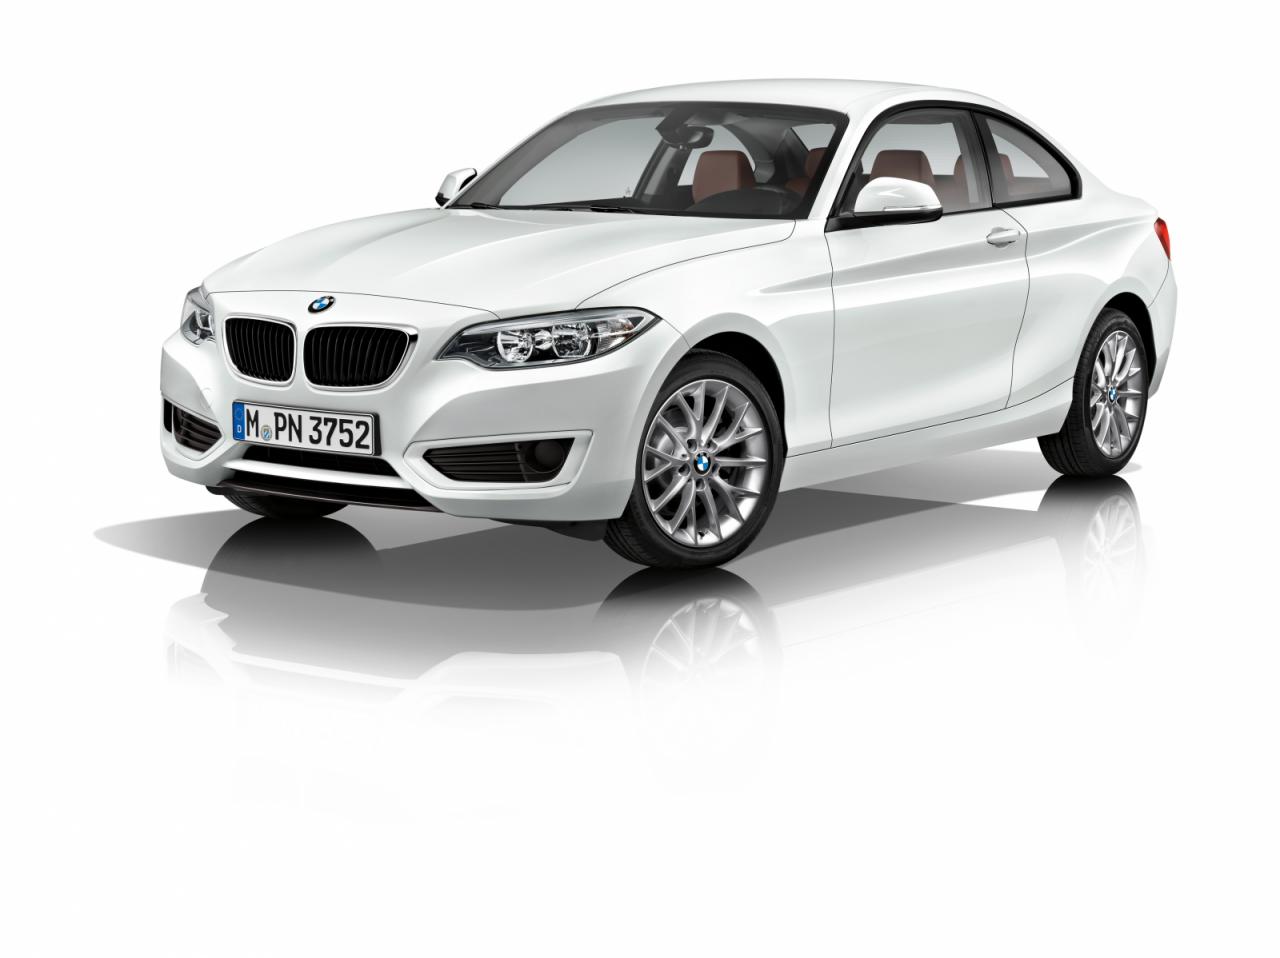 http://www.pedal.ir/wp-content/uploads/BMW-2-Series-Coupe-01.jpg